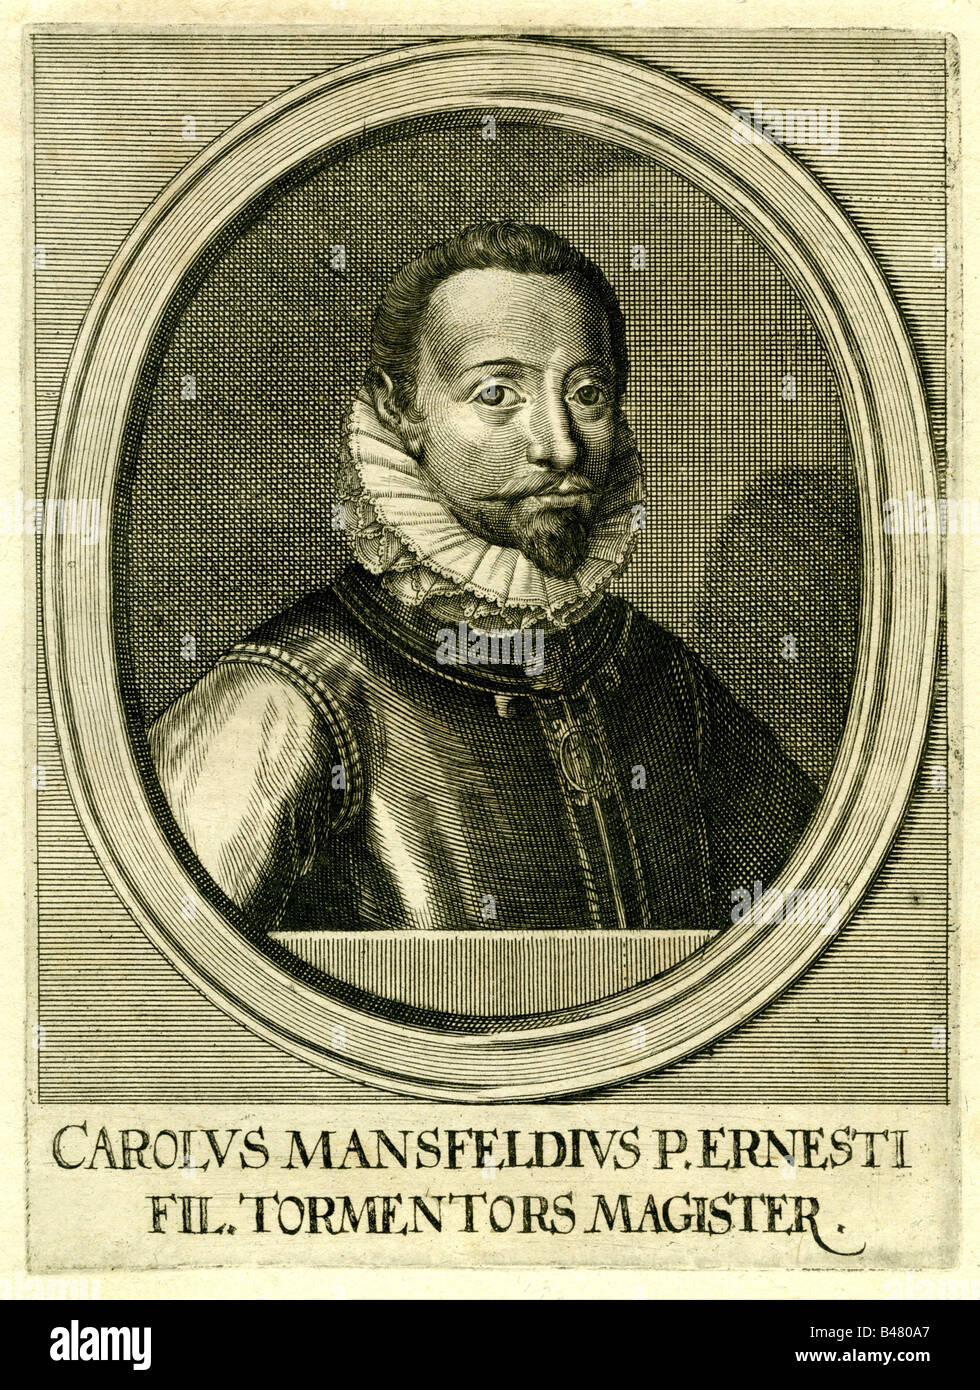 Mansfeld, Karl Count of, 1543 - 24.8.1595, German General and Admiral, portrait, engraving, 16th century, Stock Photo